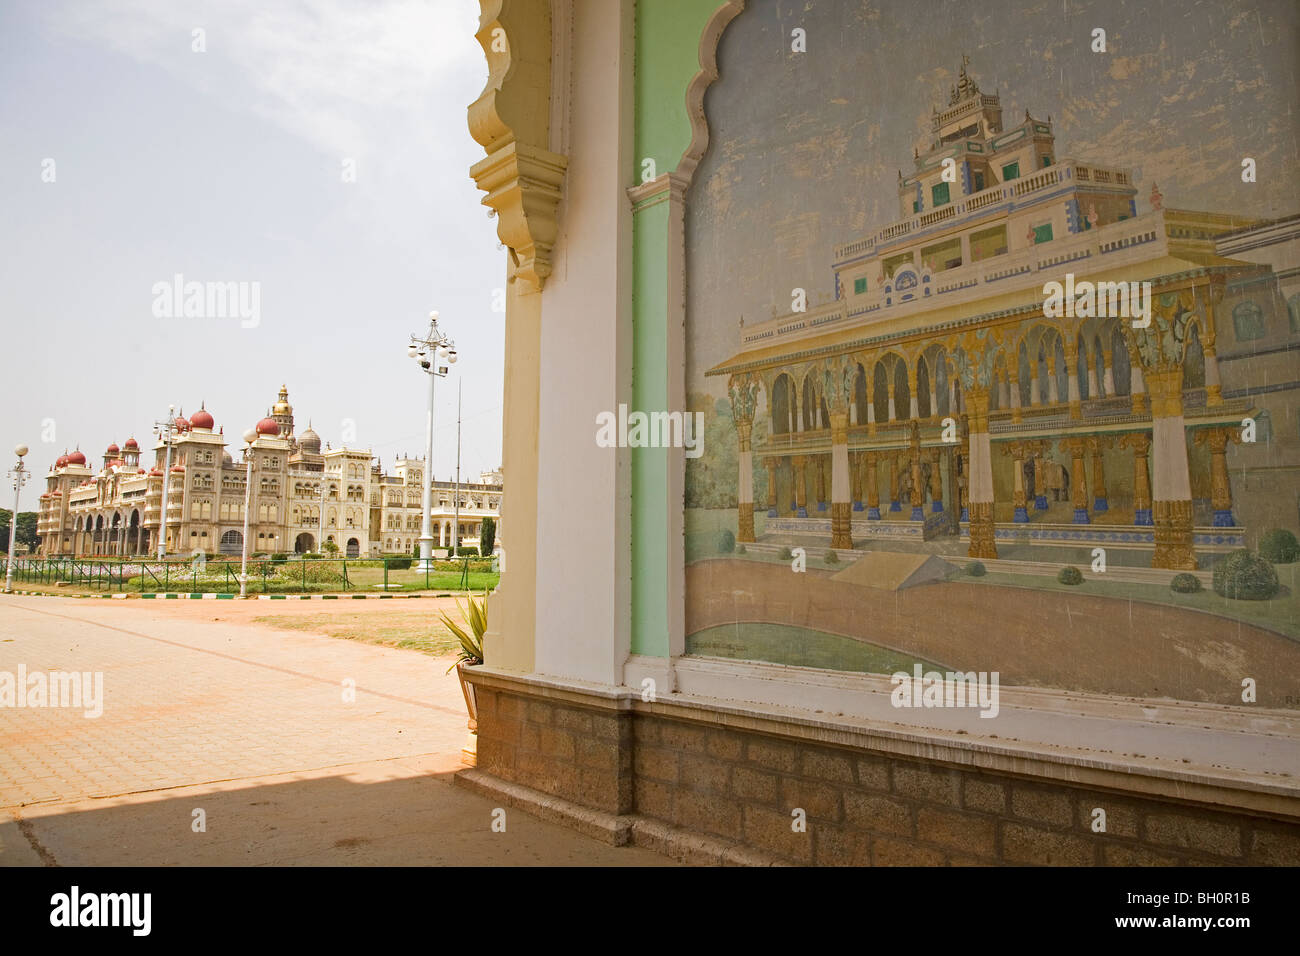 A fresco shows a royal palace in one of the gateways of the Indo-Saracenic Amba Vilas Palace in Mysore, India Stock Photo